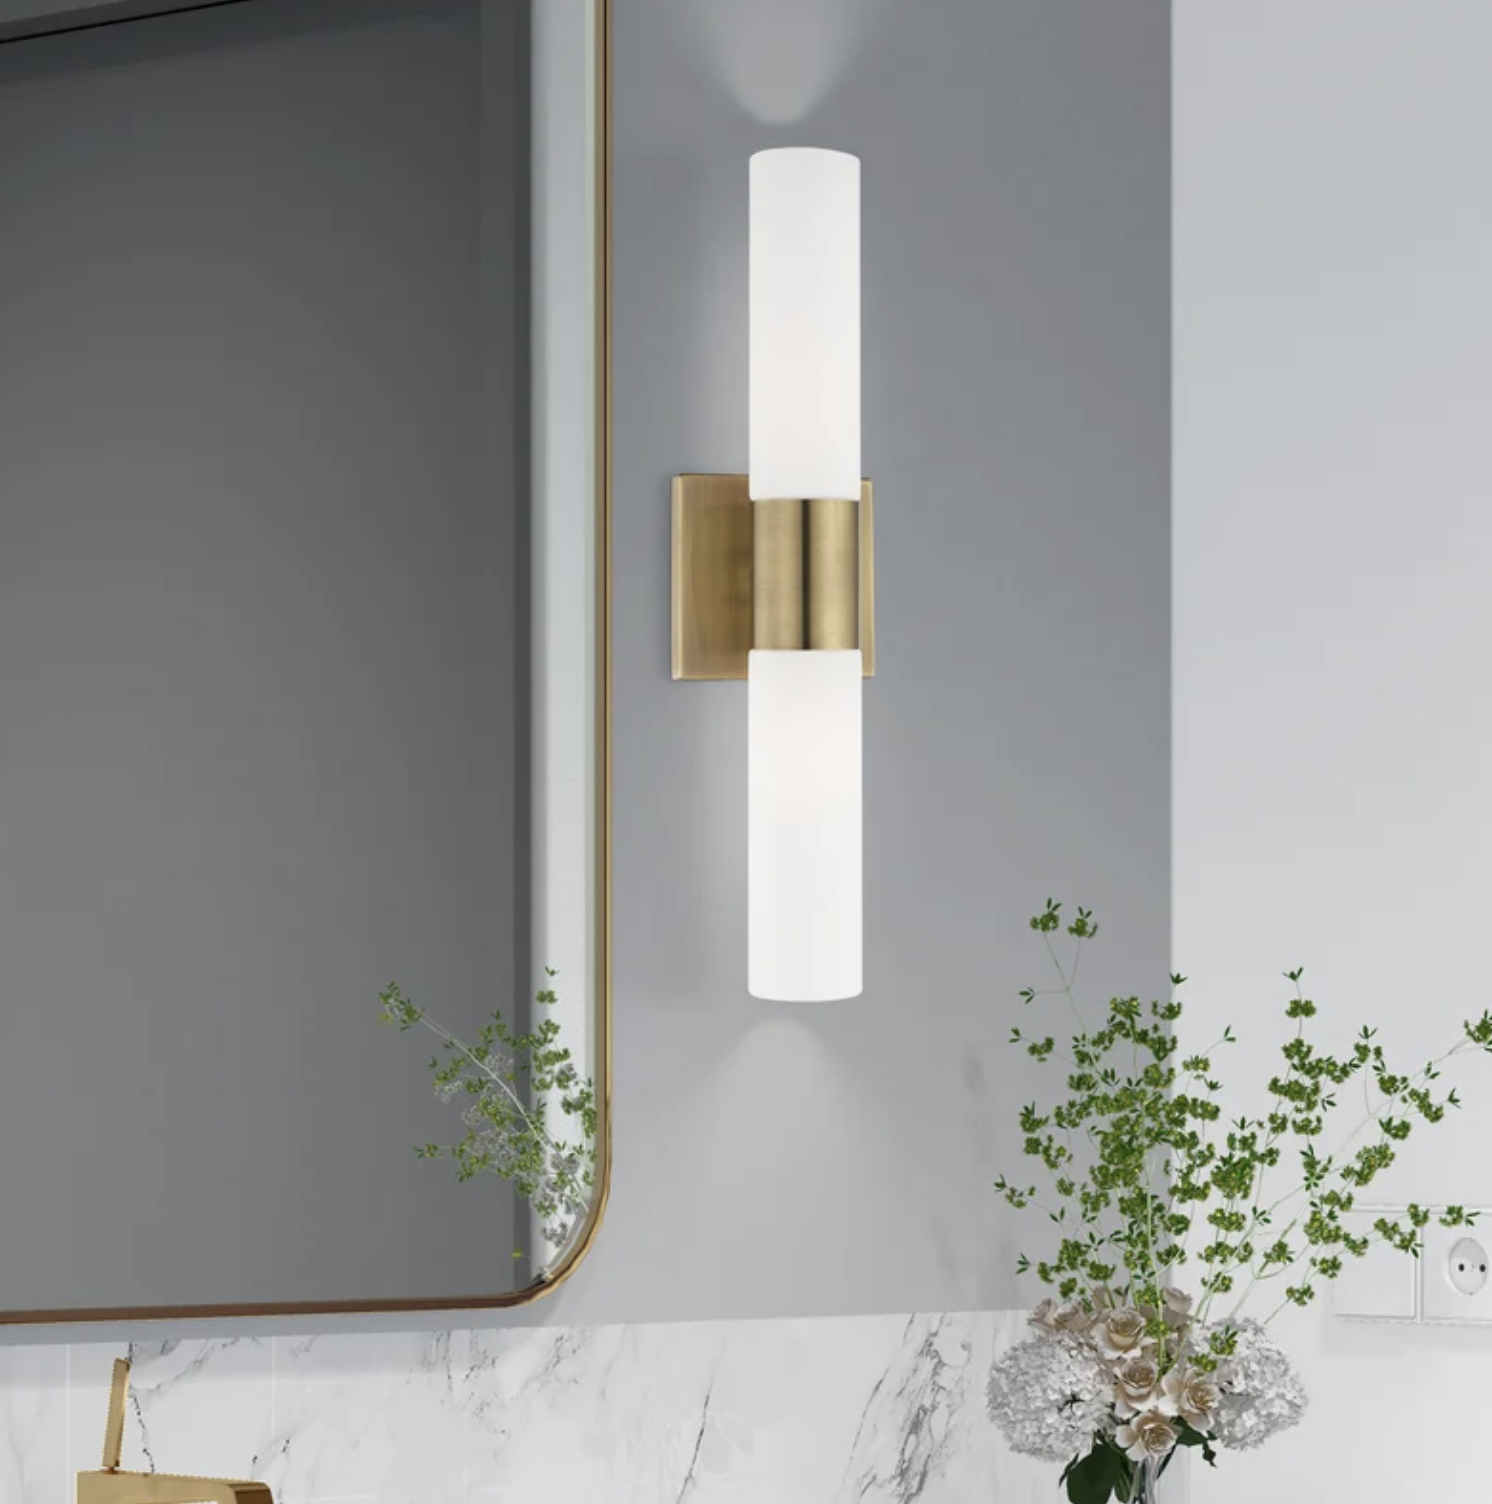 An image of a dimmable light bath bar next to a mirror